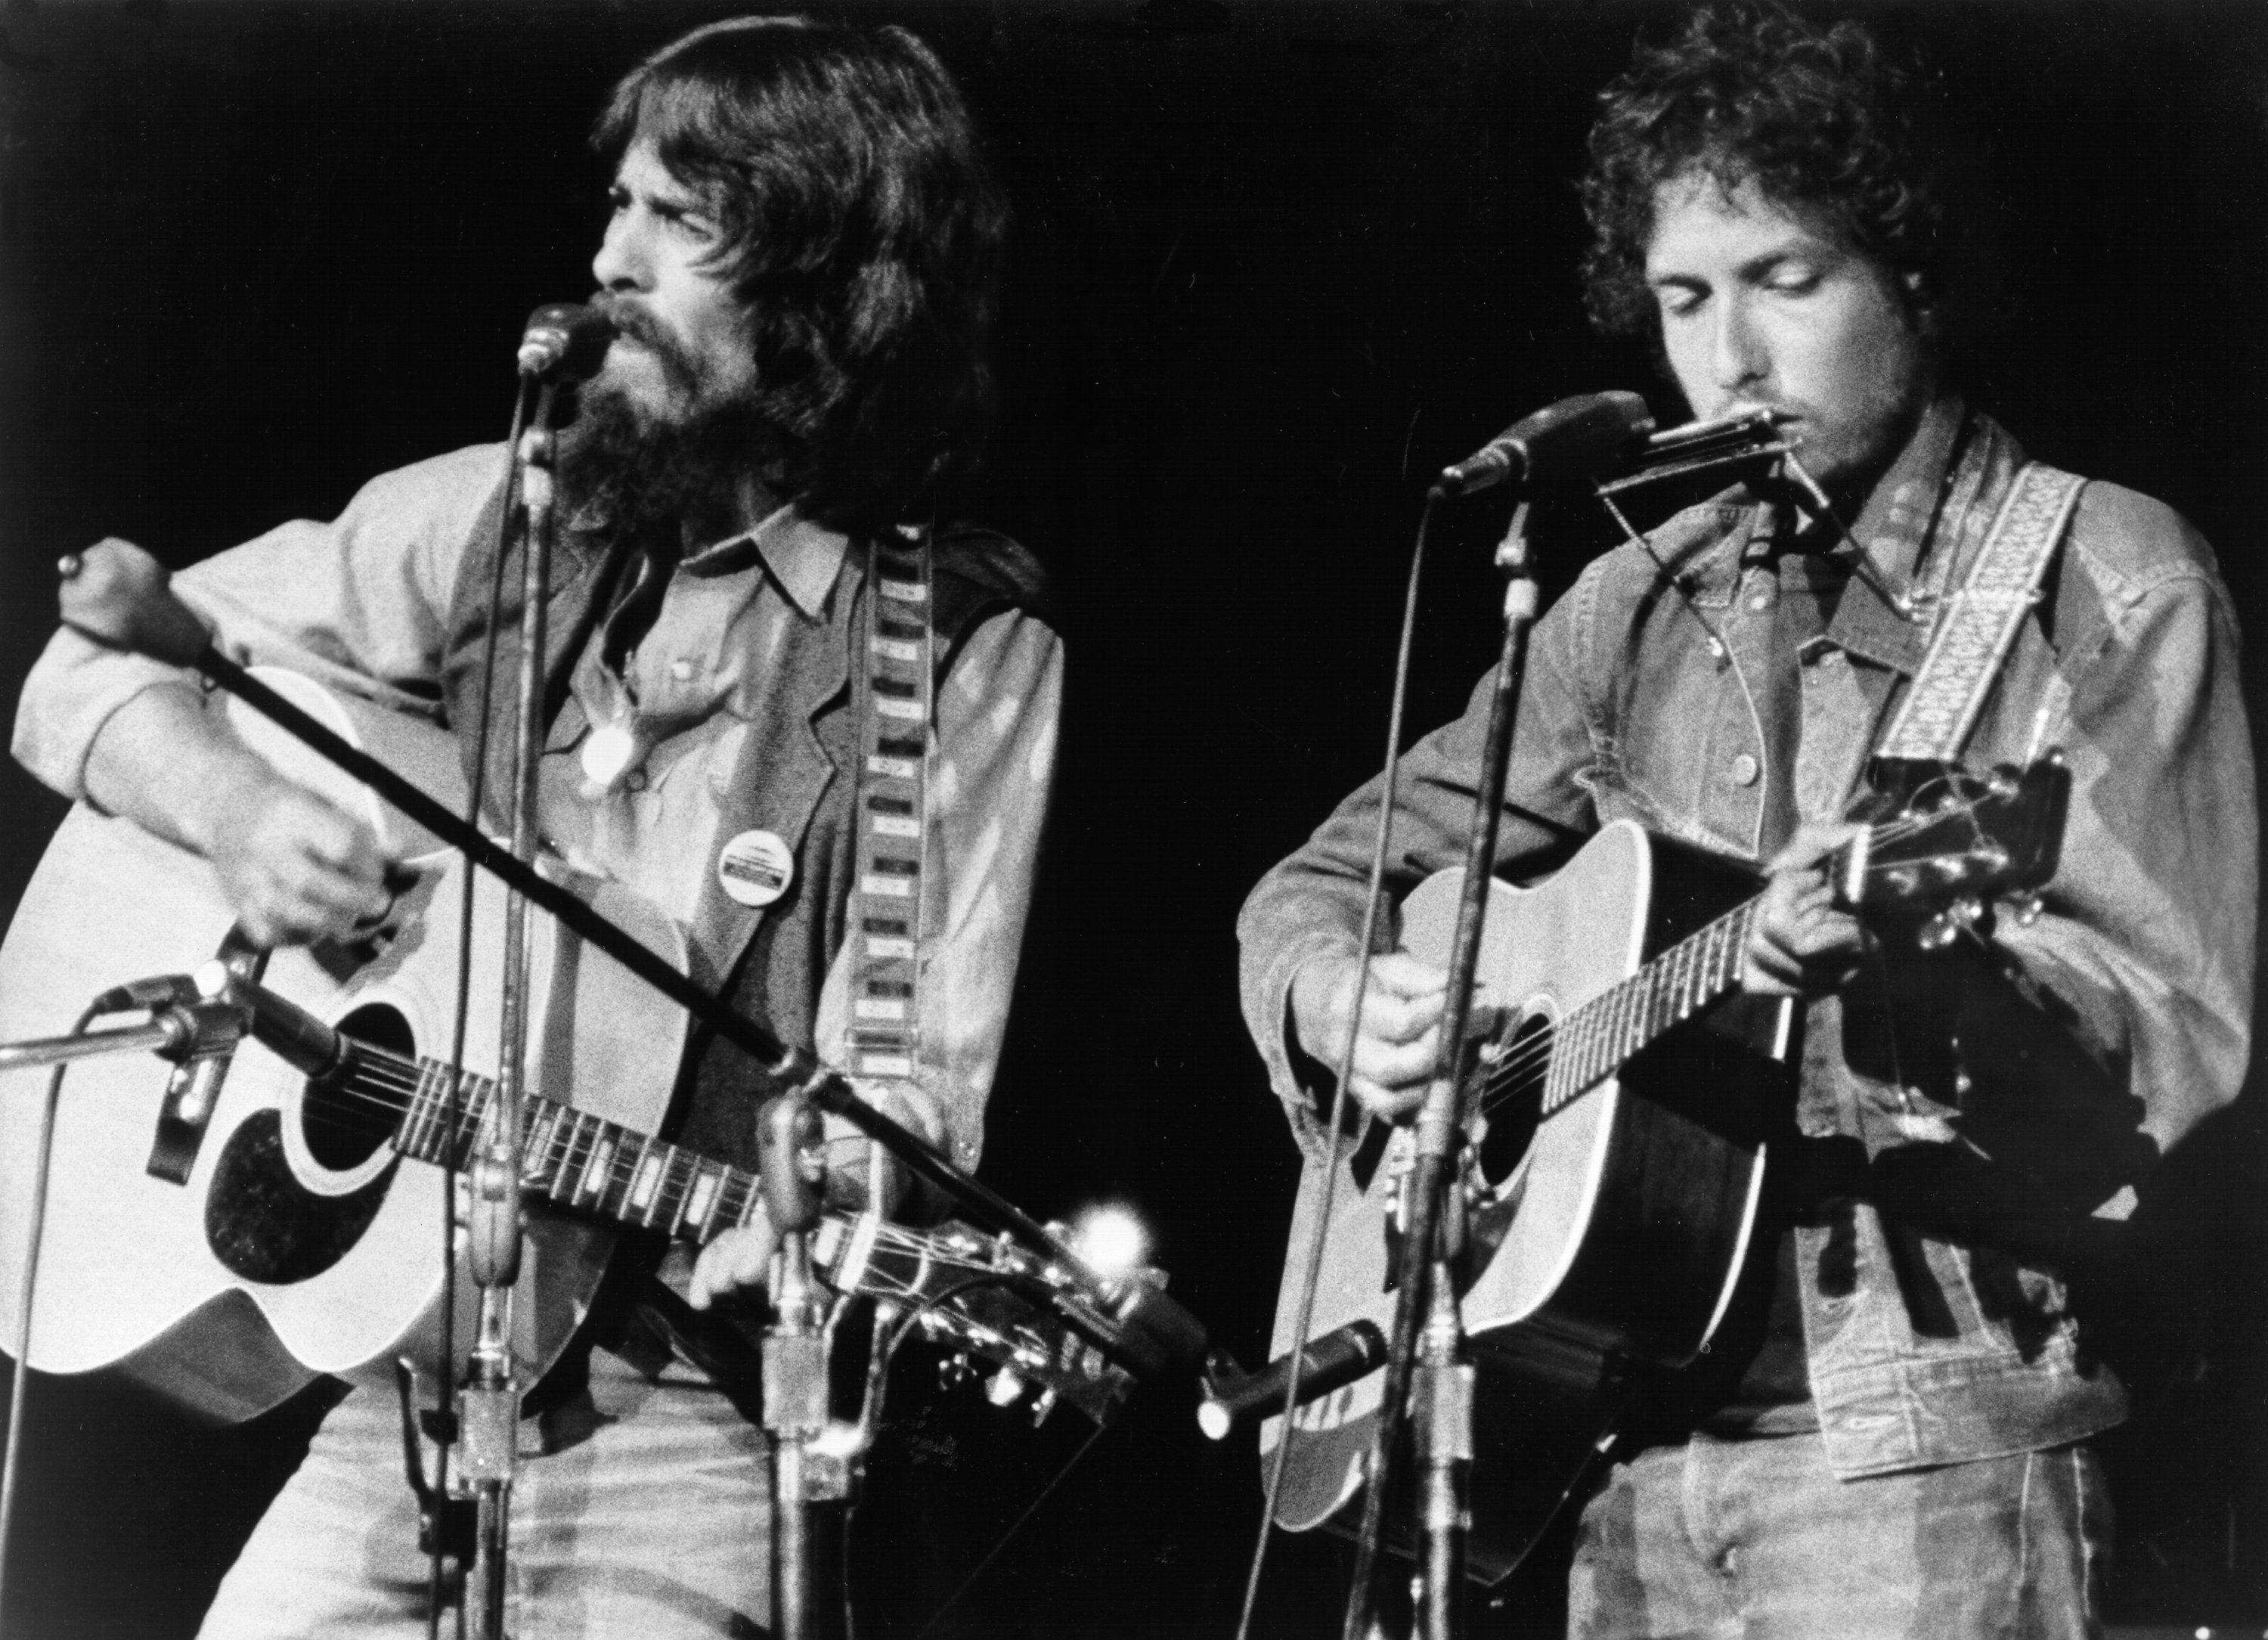 A black and white picture of George Harrison and Bob Dylan playing guitar and standing in front of microphones.